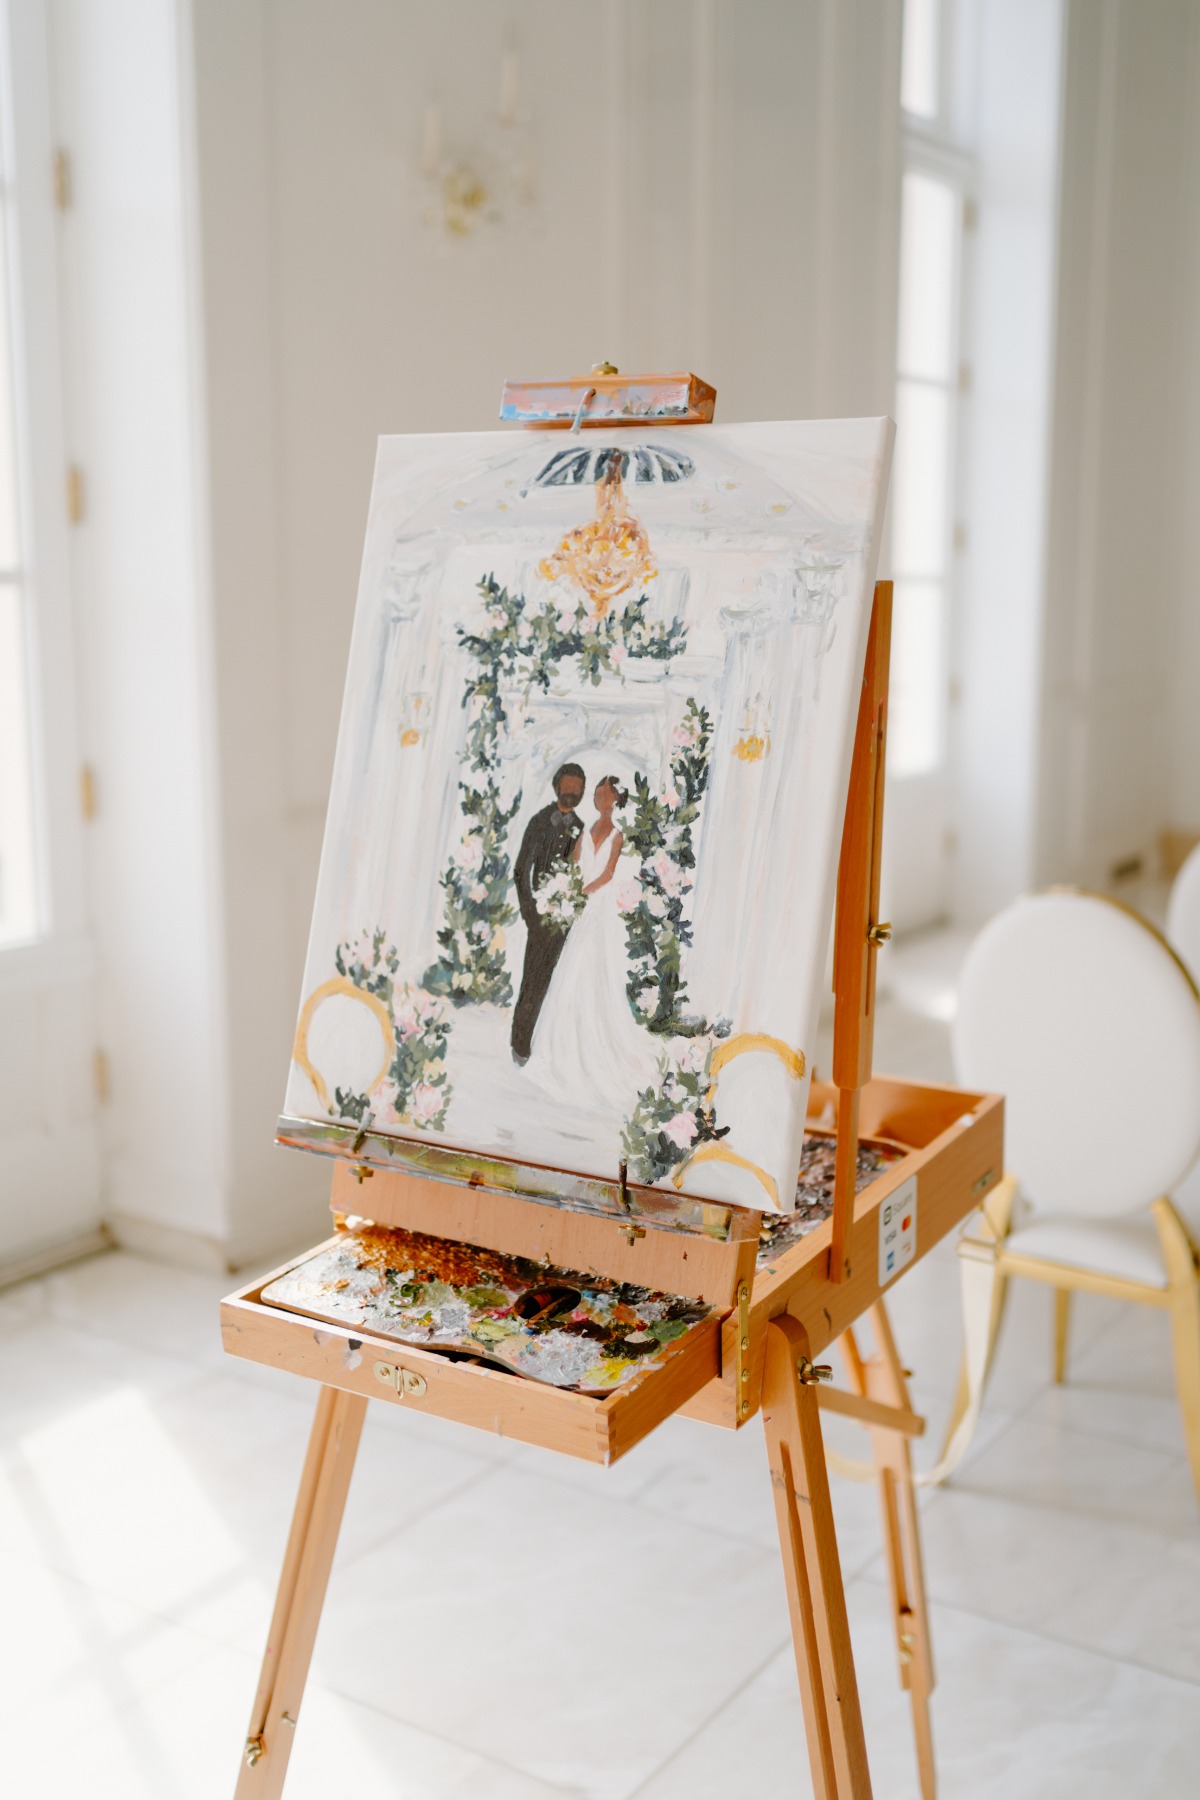 This is Why You Need a Live Painter for Your Wedding